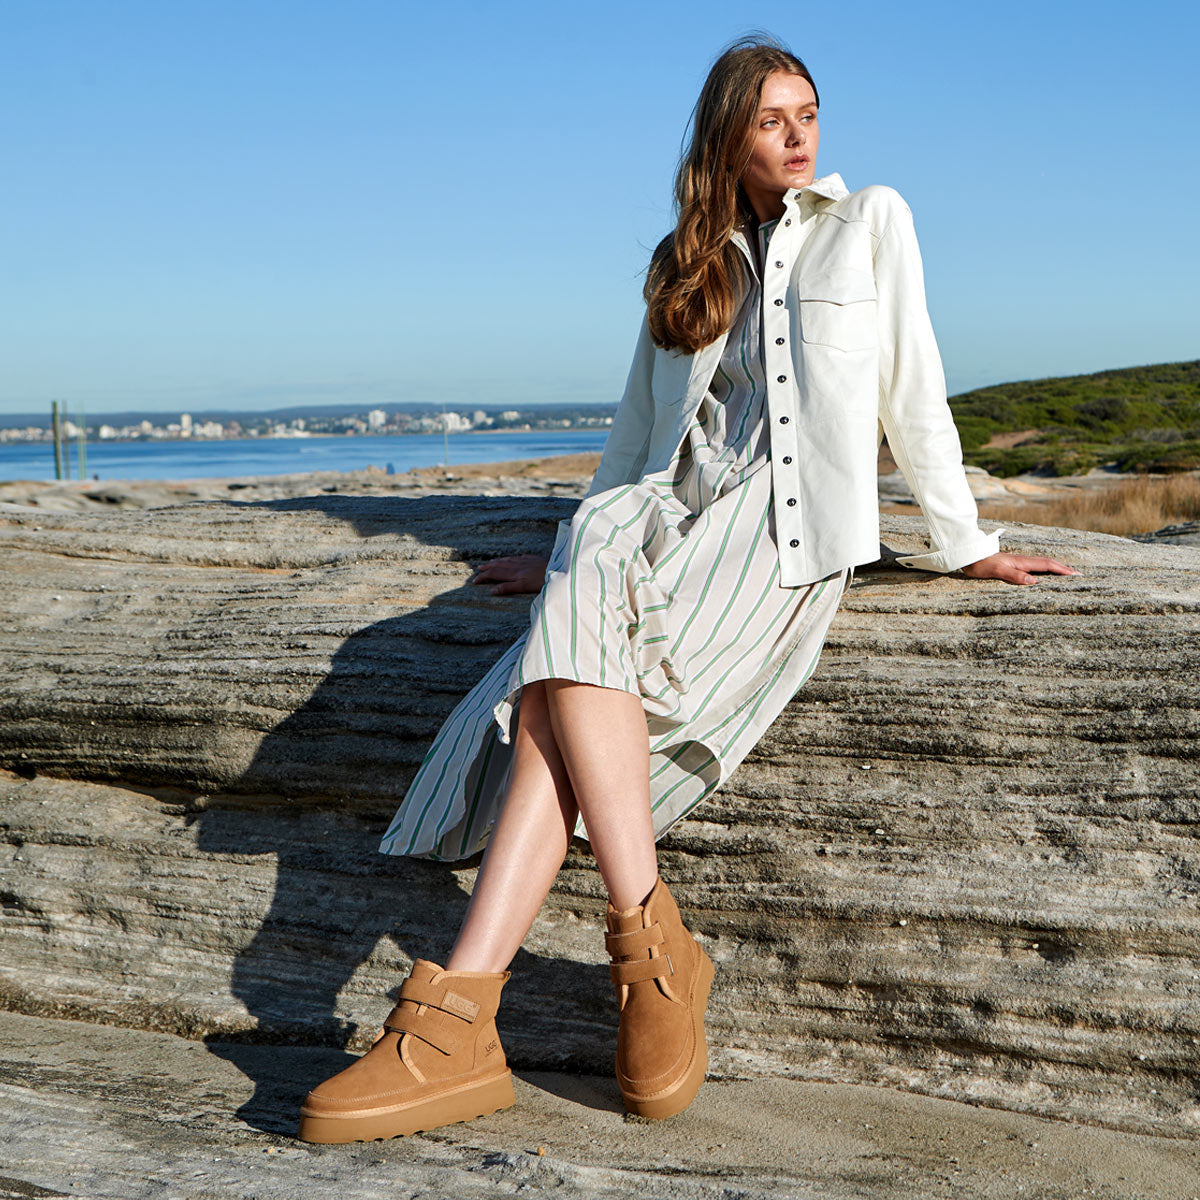 UGG boots perfect for summer